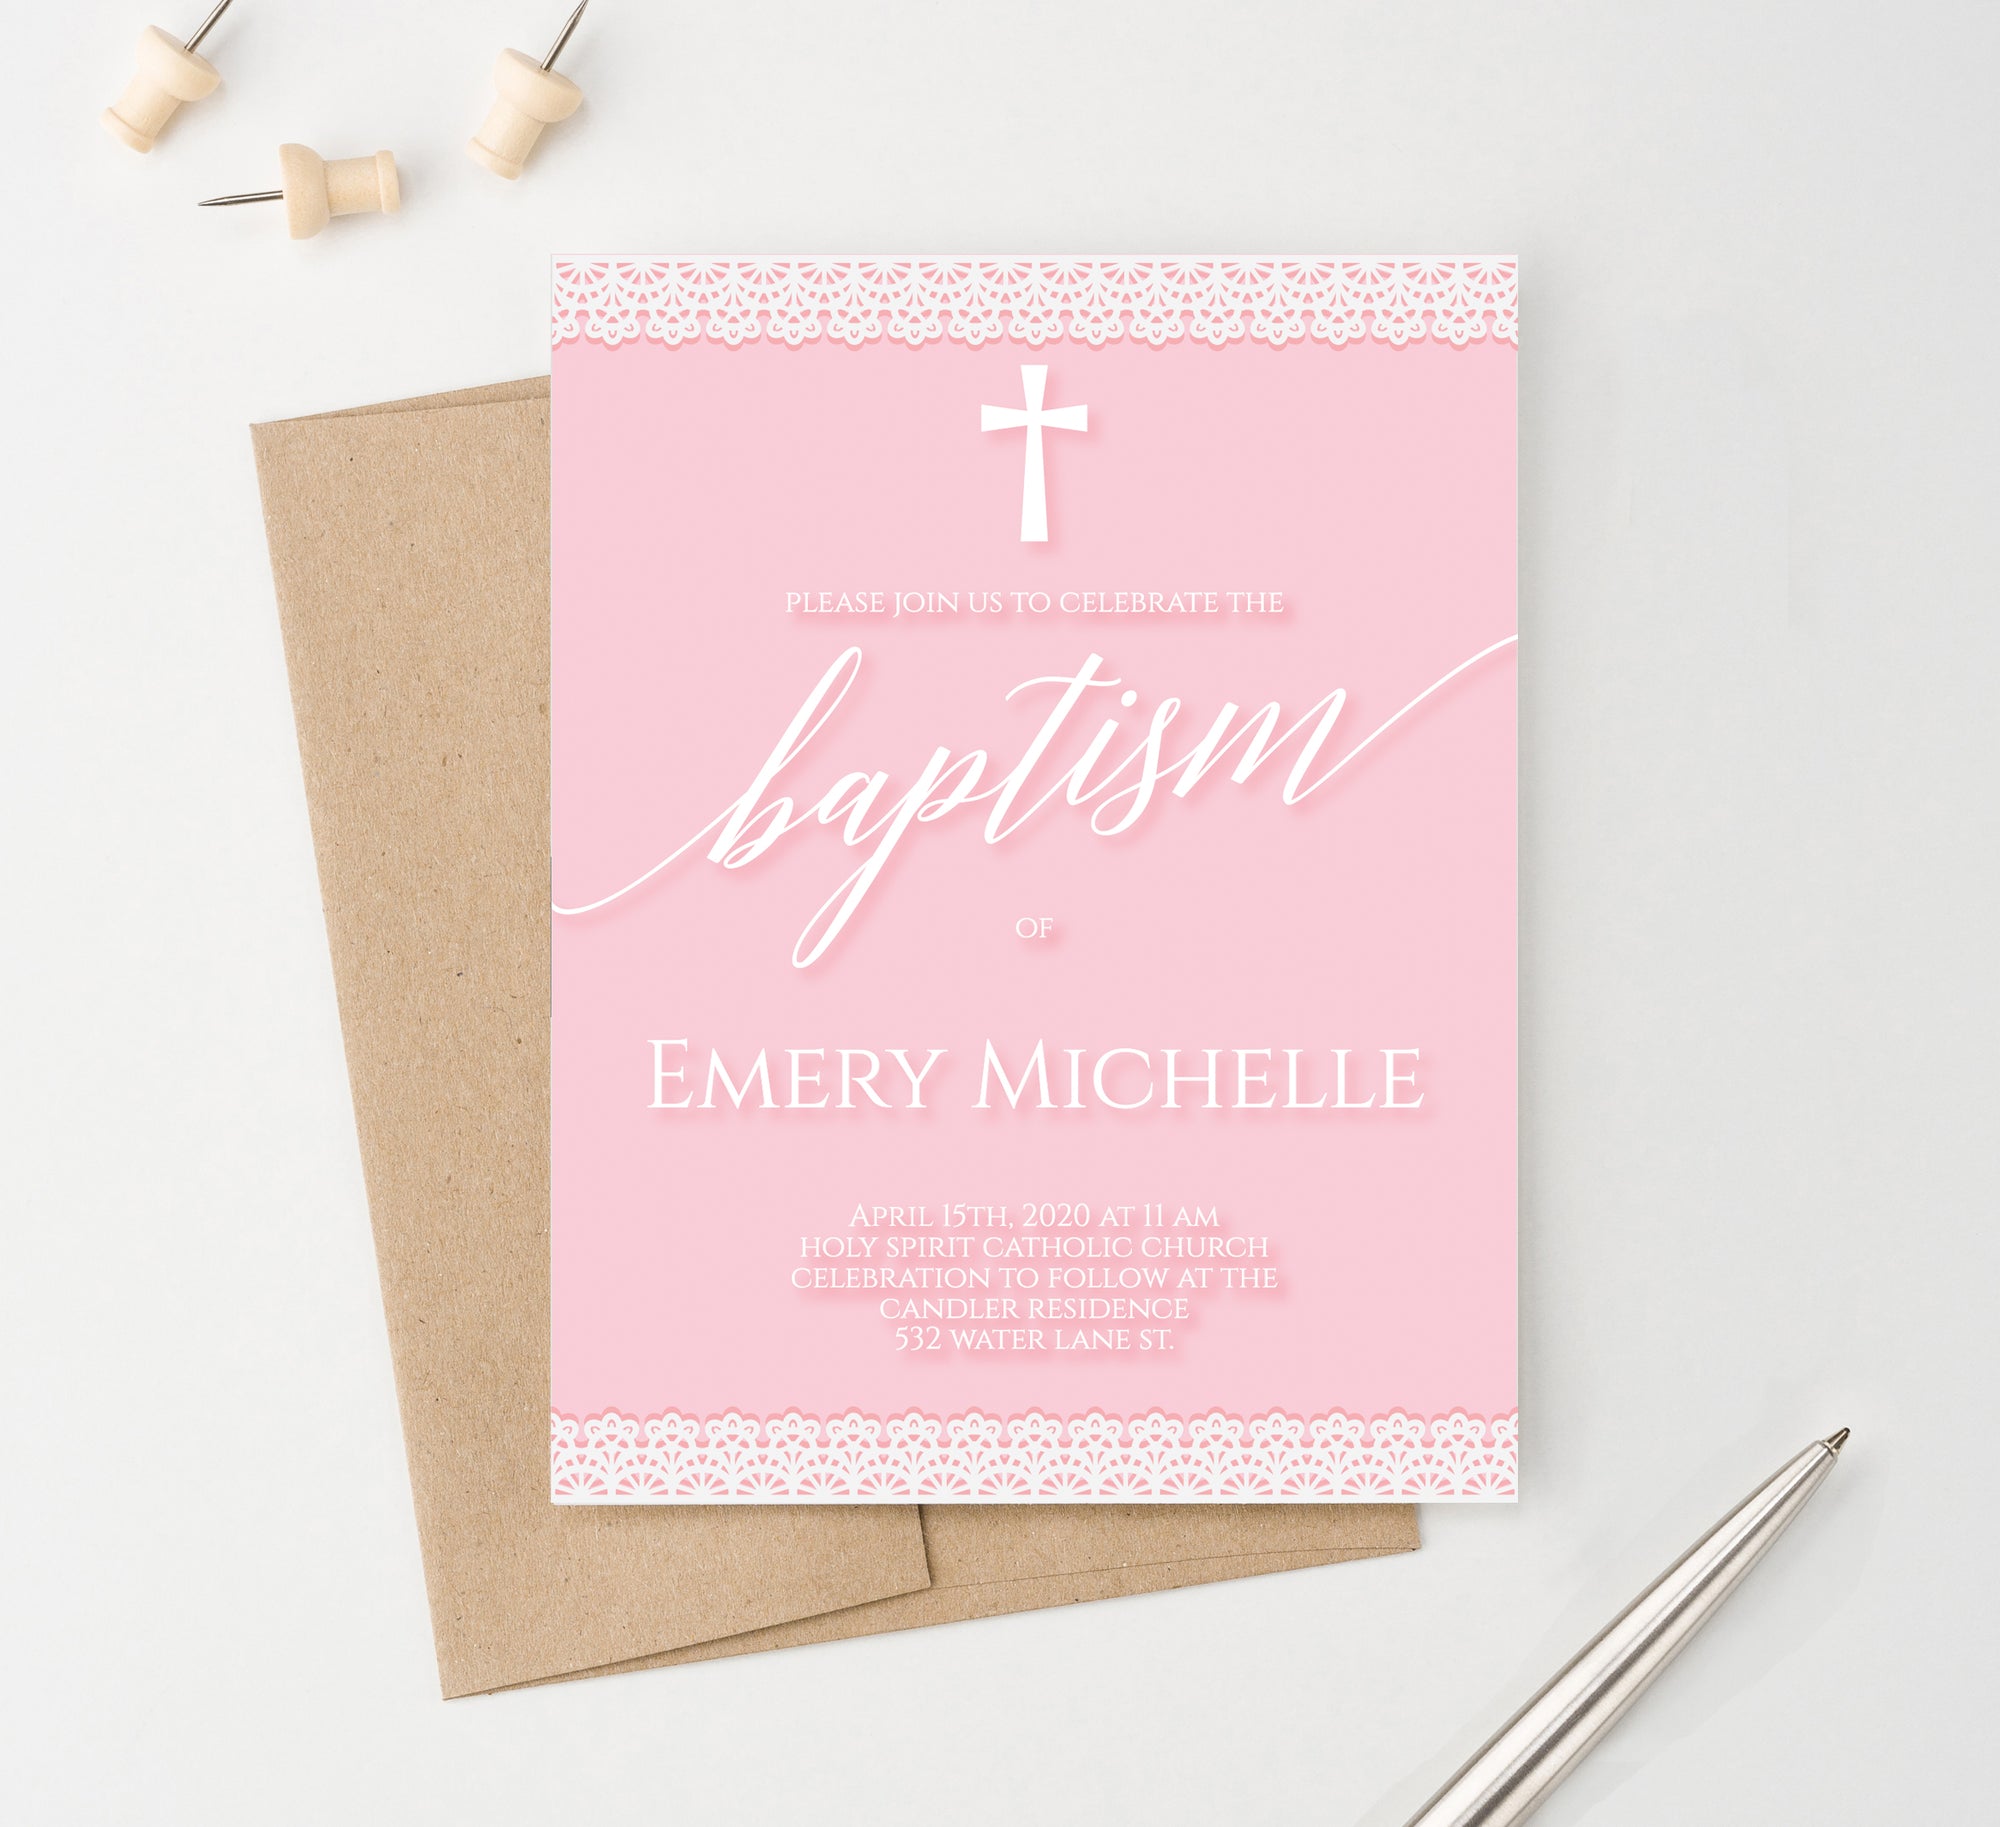 Personalized Girl Baptism Invitations Pink With White Lace